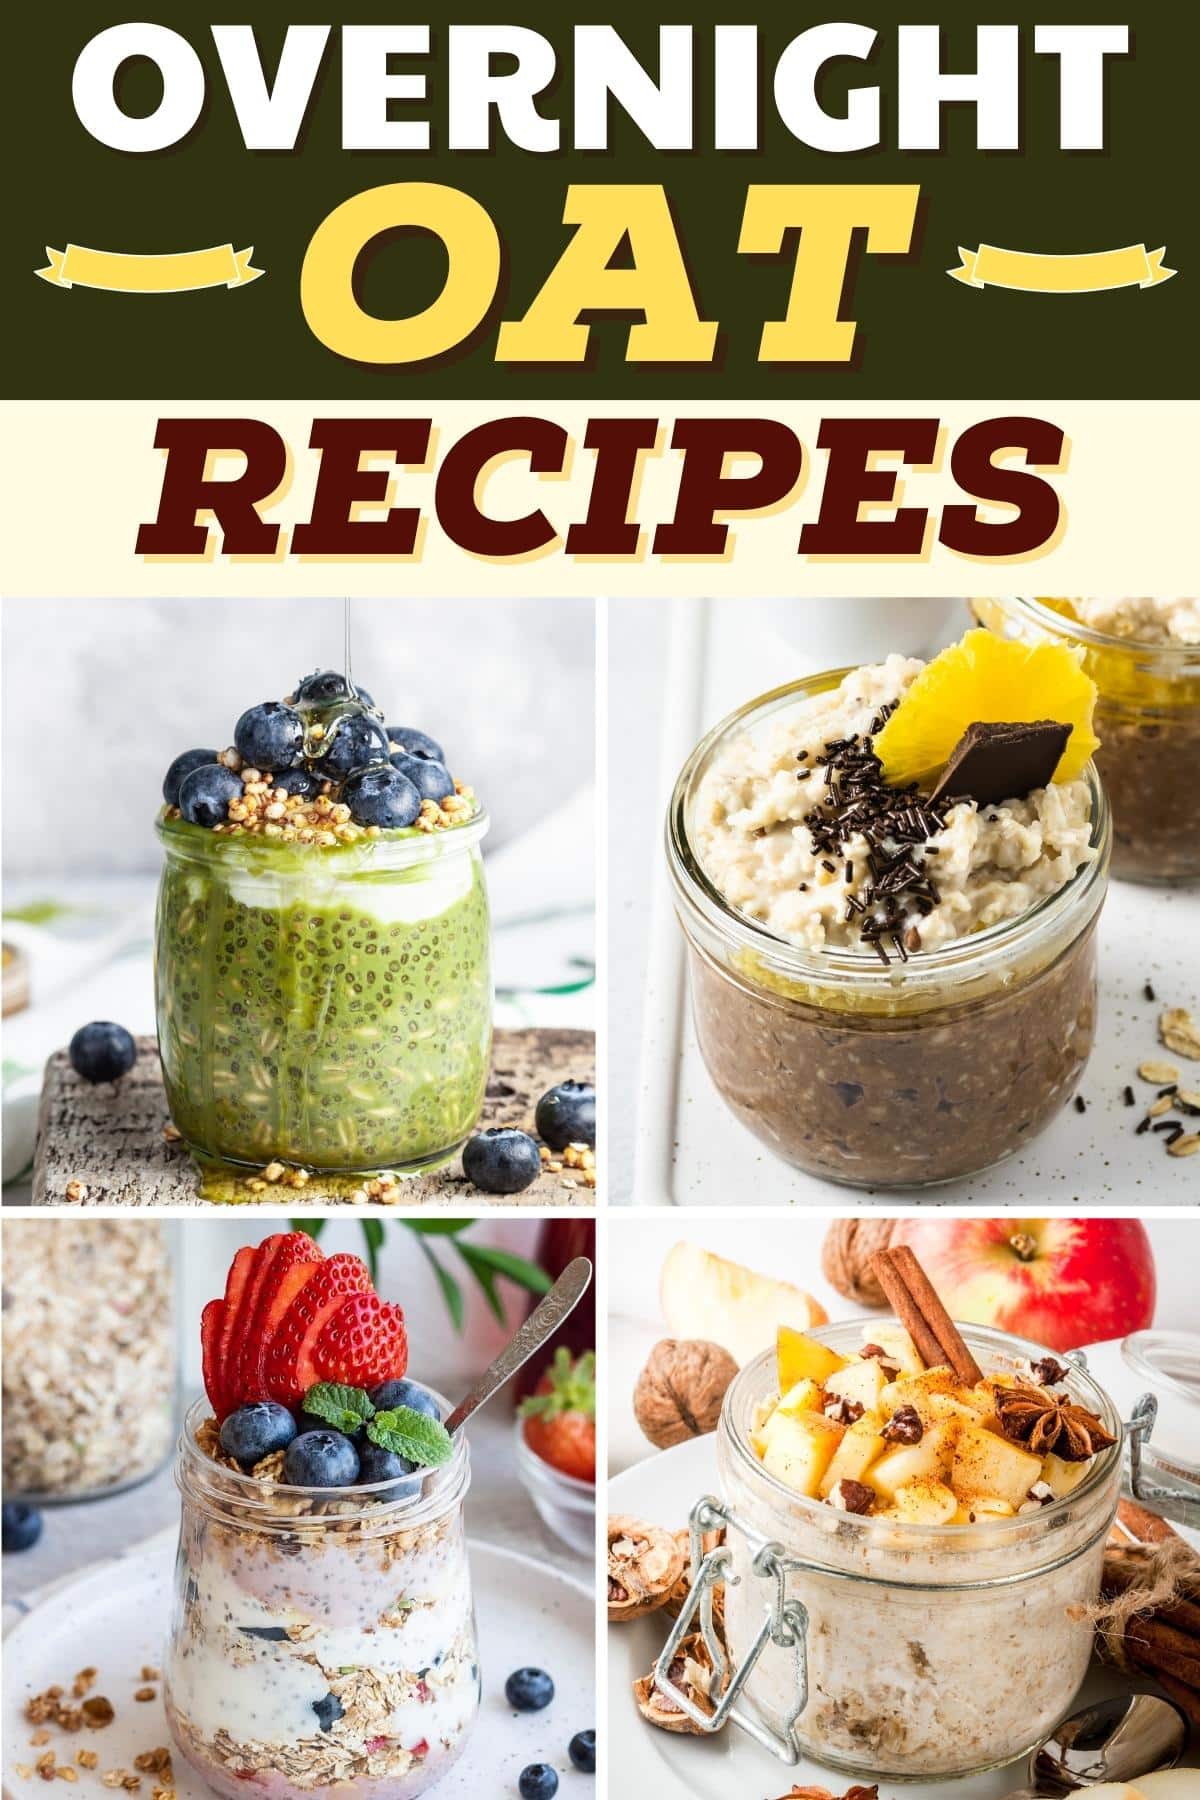 16 Easy Overnight Oat Recipes (+ Best Flavors) - Insanely Good